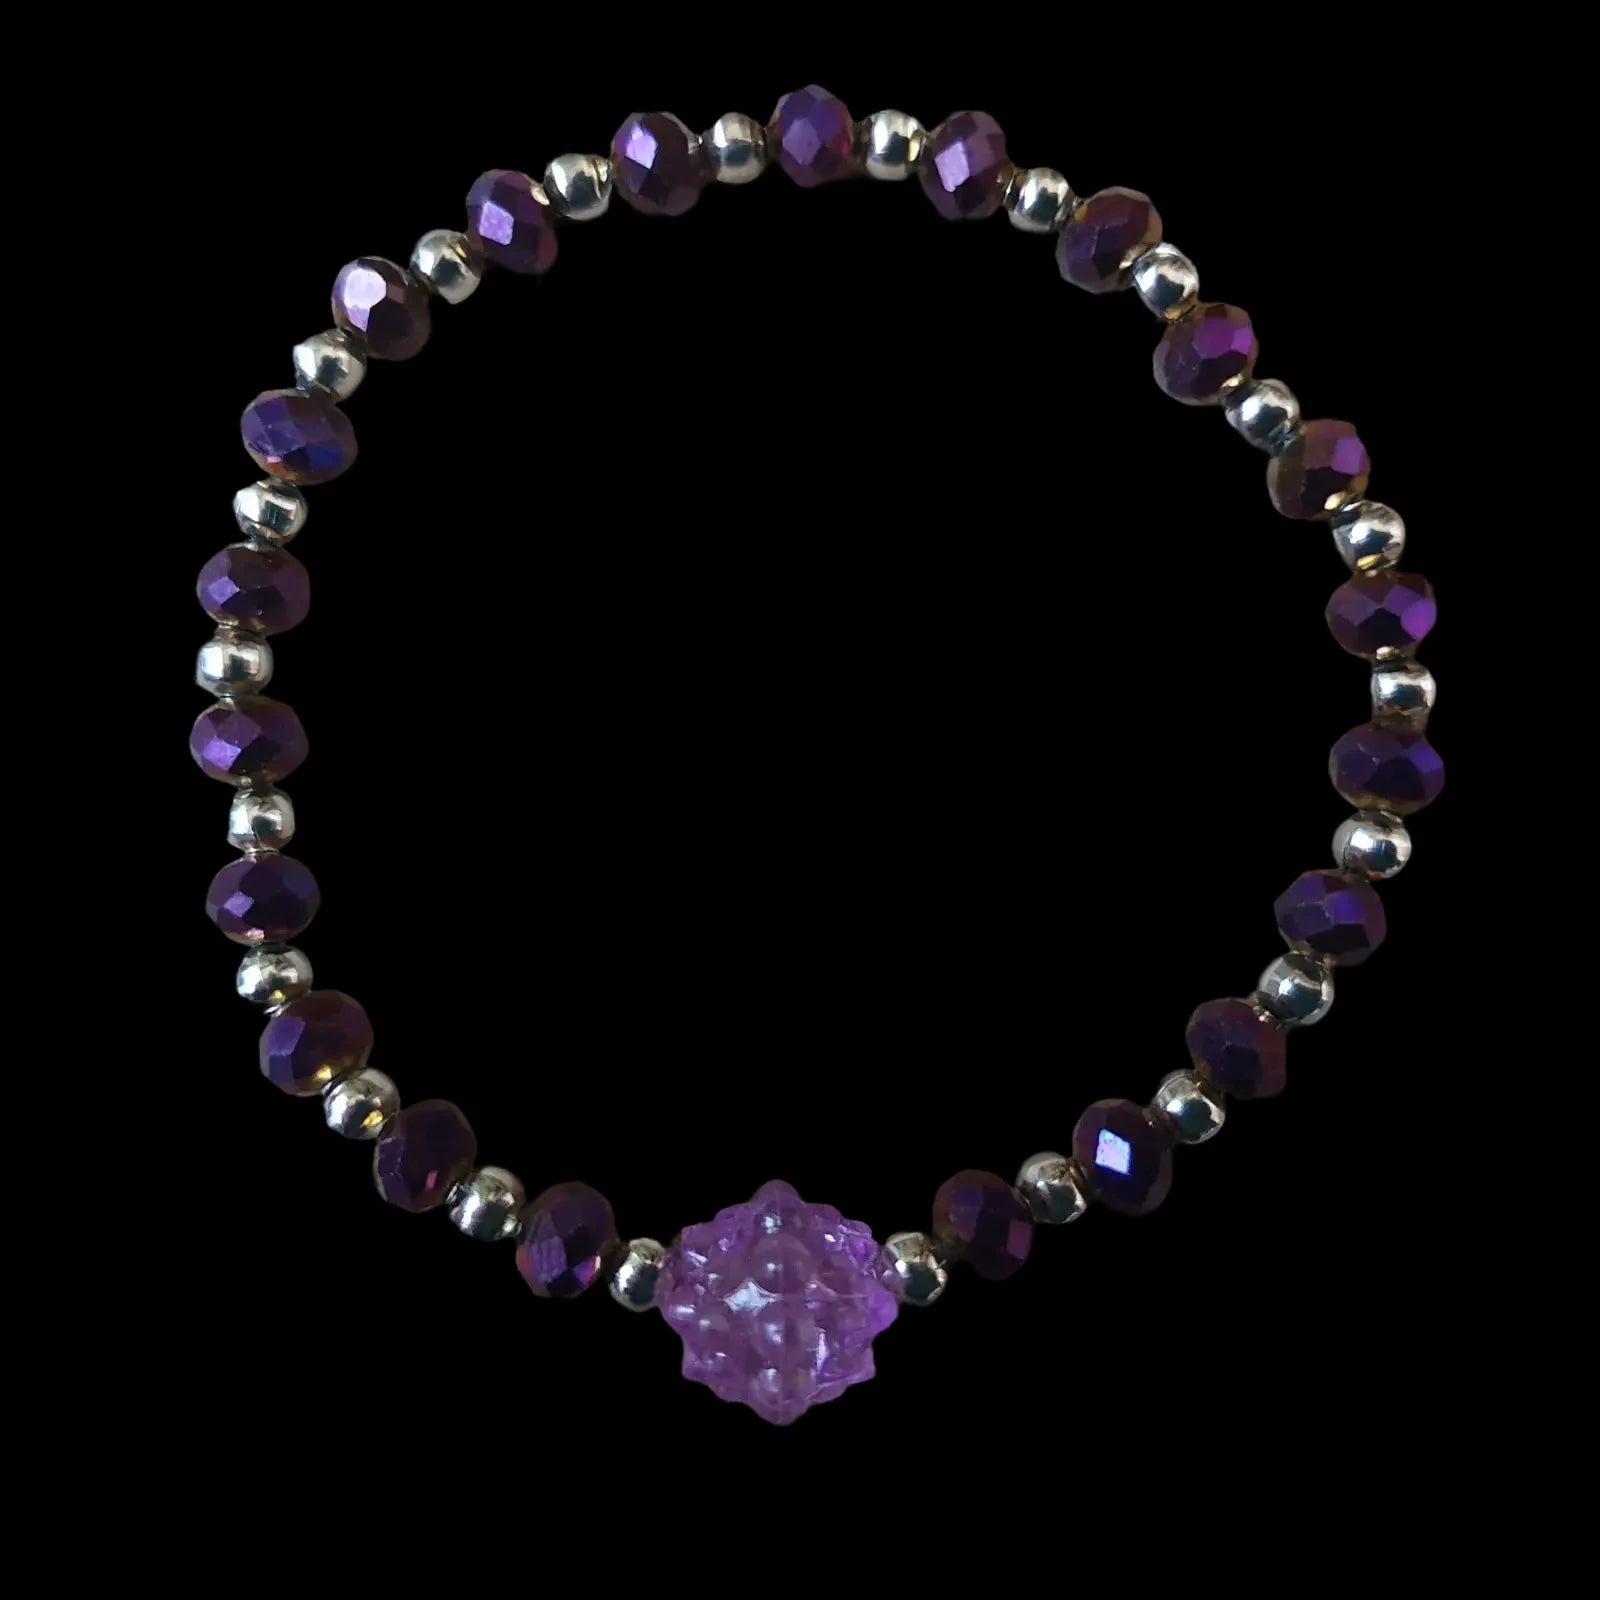 Unique Handmade Crafted Beaded Bracelet Purple Silver Gift